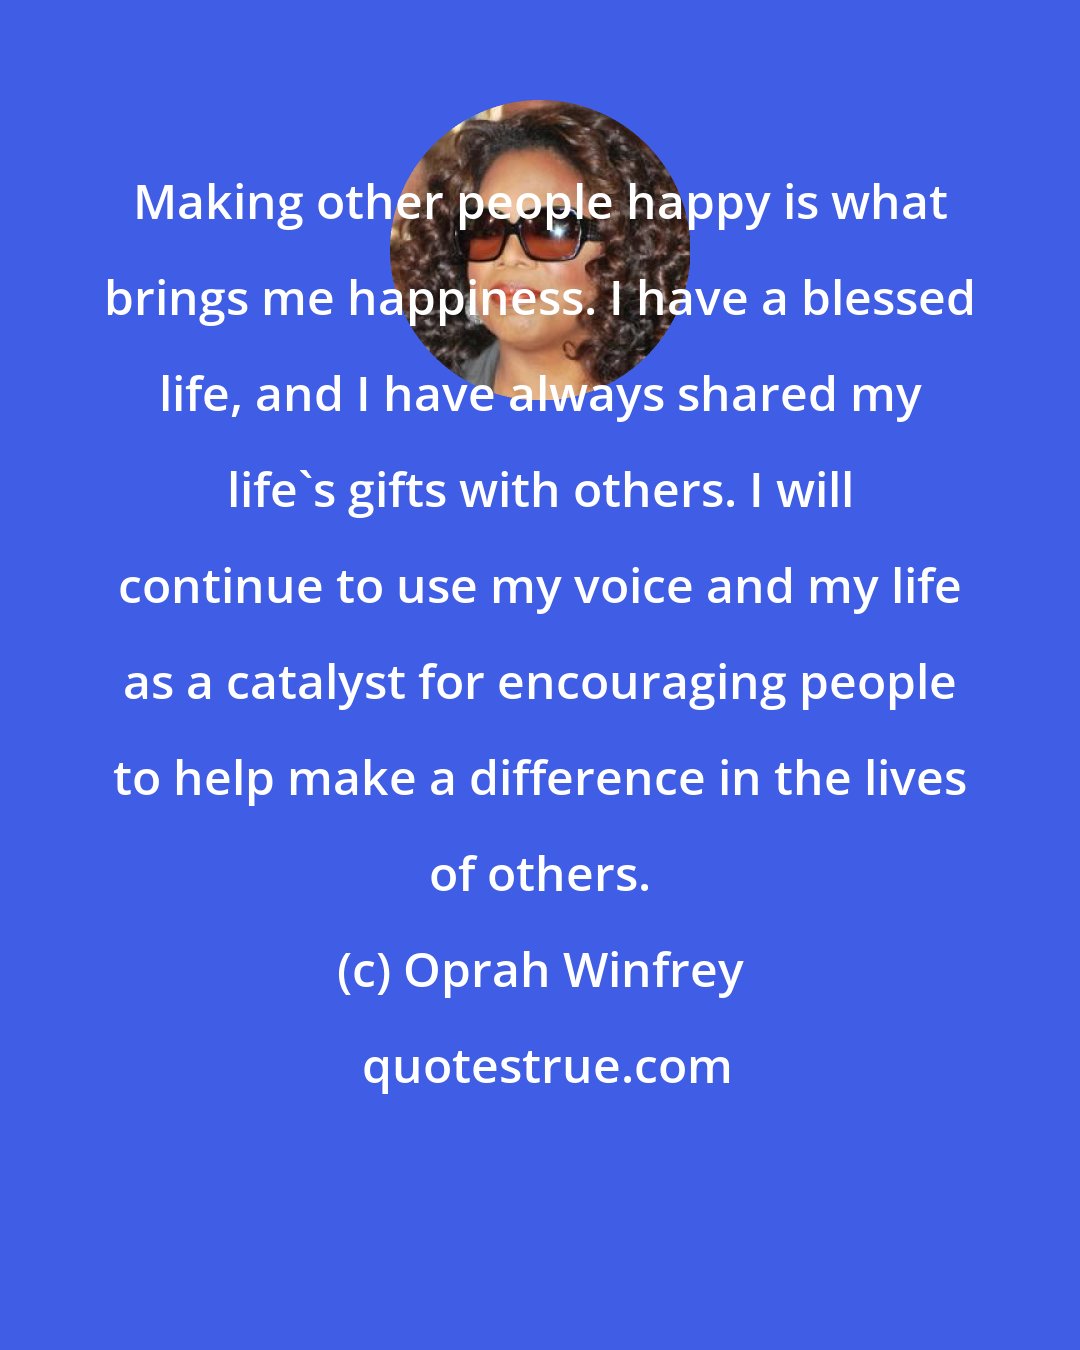 Oprah Winfrey: Making other people happy is what brings me happiness. I have a blessed life, and I have always shared my life's gifts with others. I will continue to use my voice and my life as a catalyst for encouraging people to help make a difference in the lives of others.